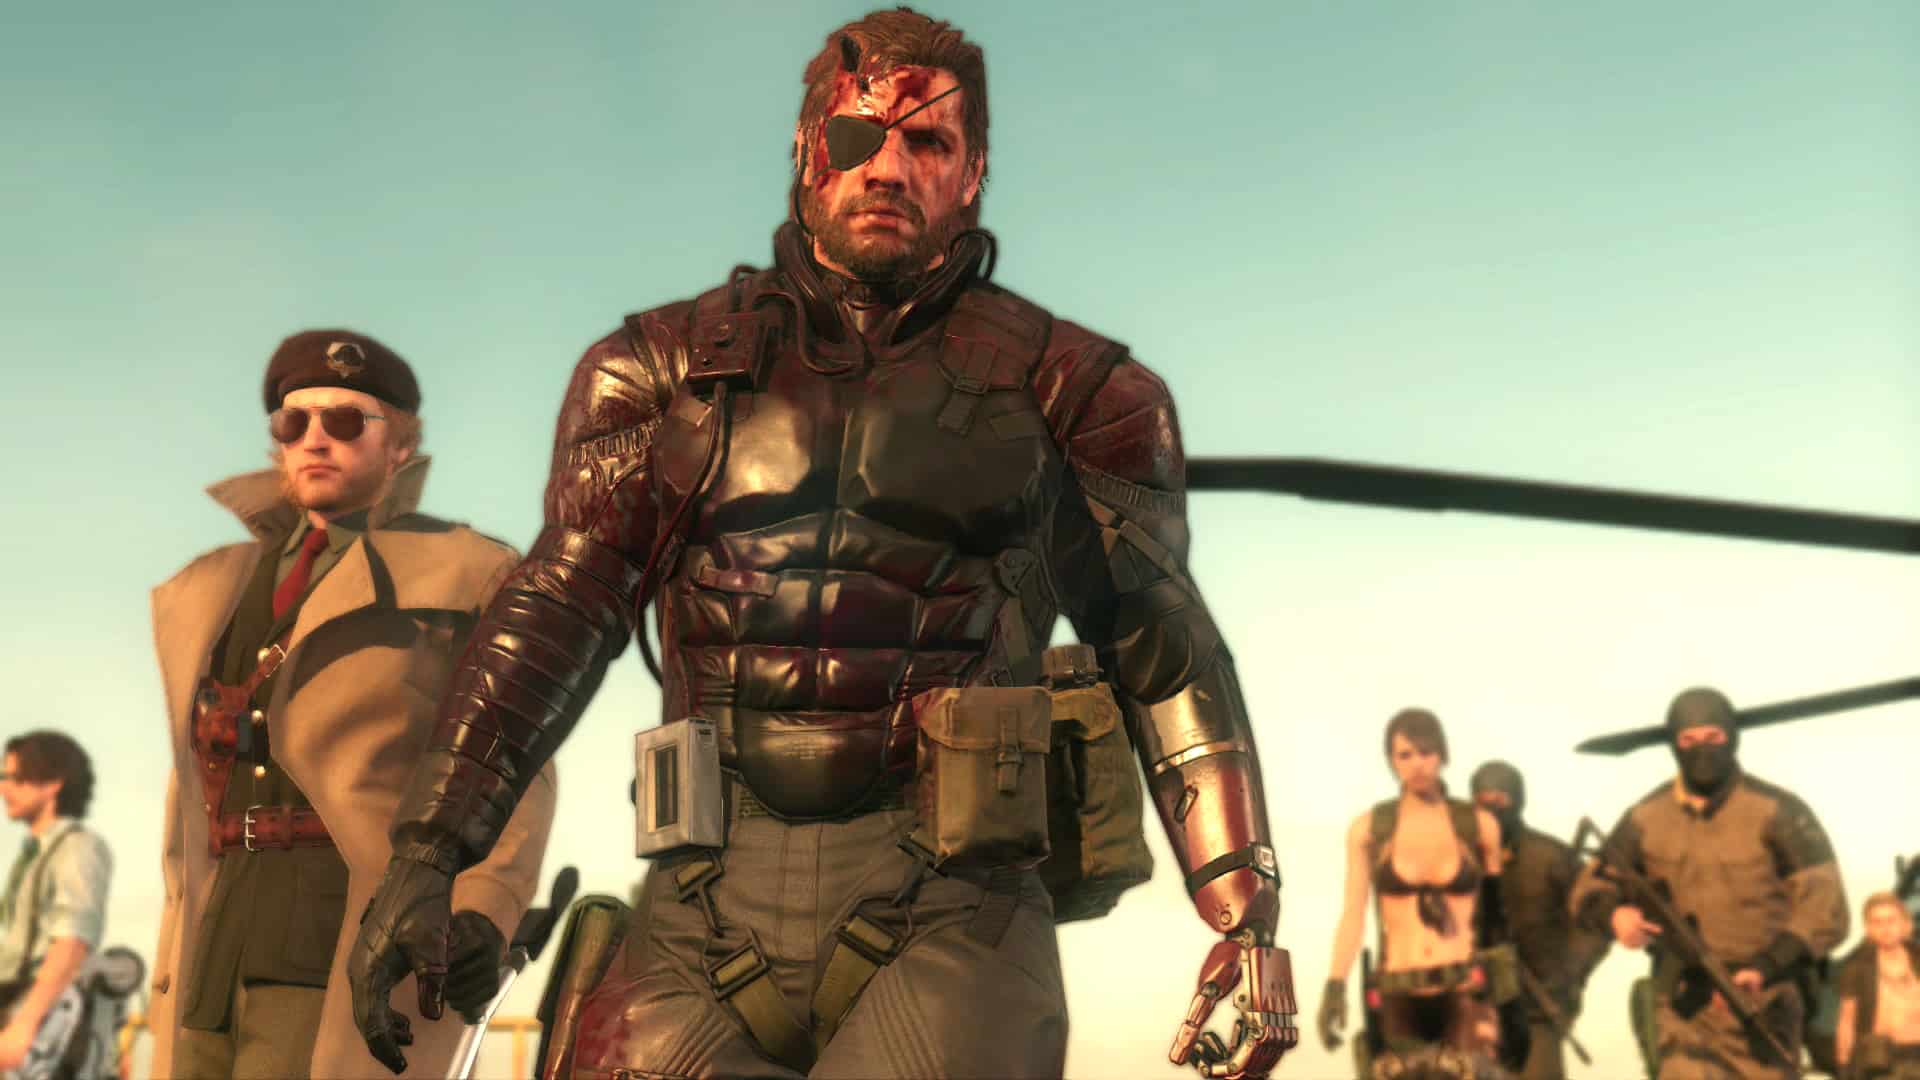 The Complete List of Metal Gear Games in Chronological & Release Order